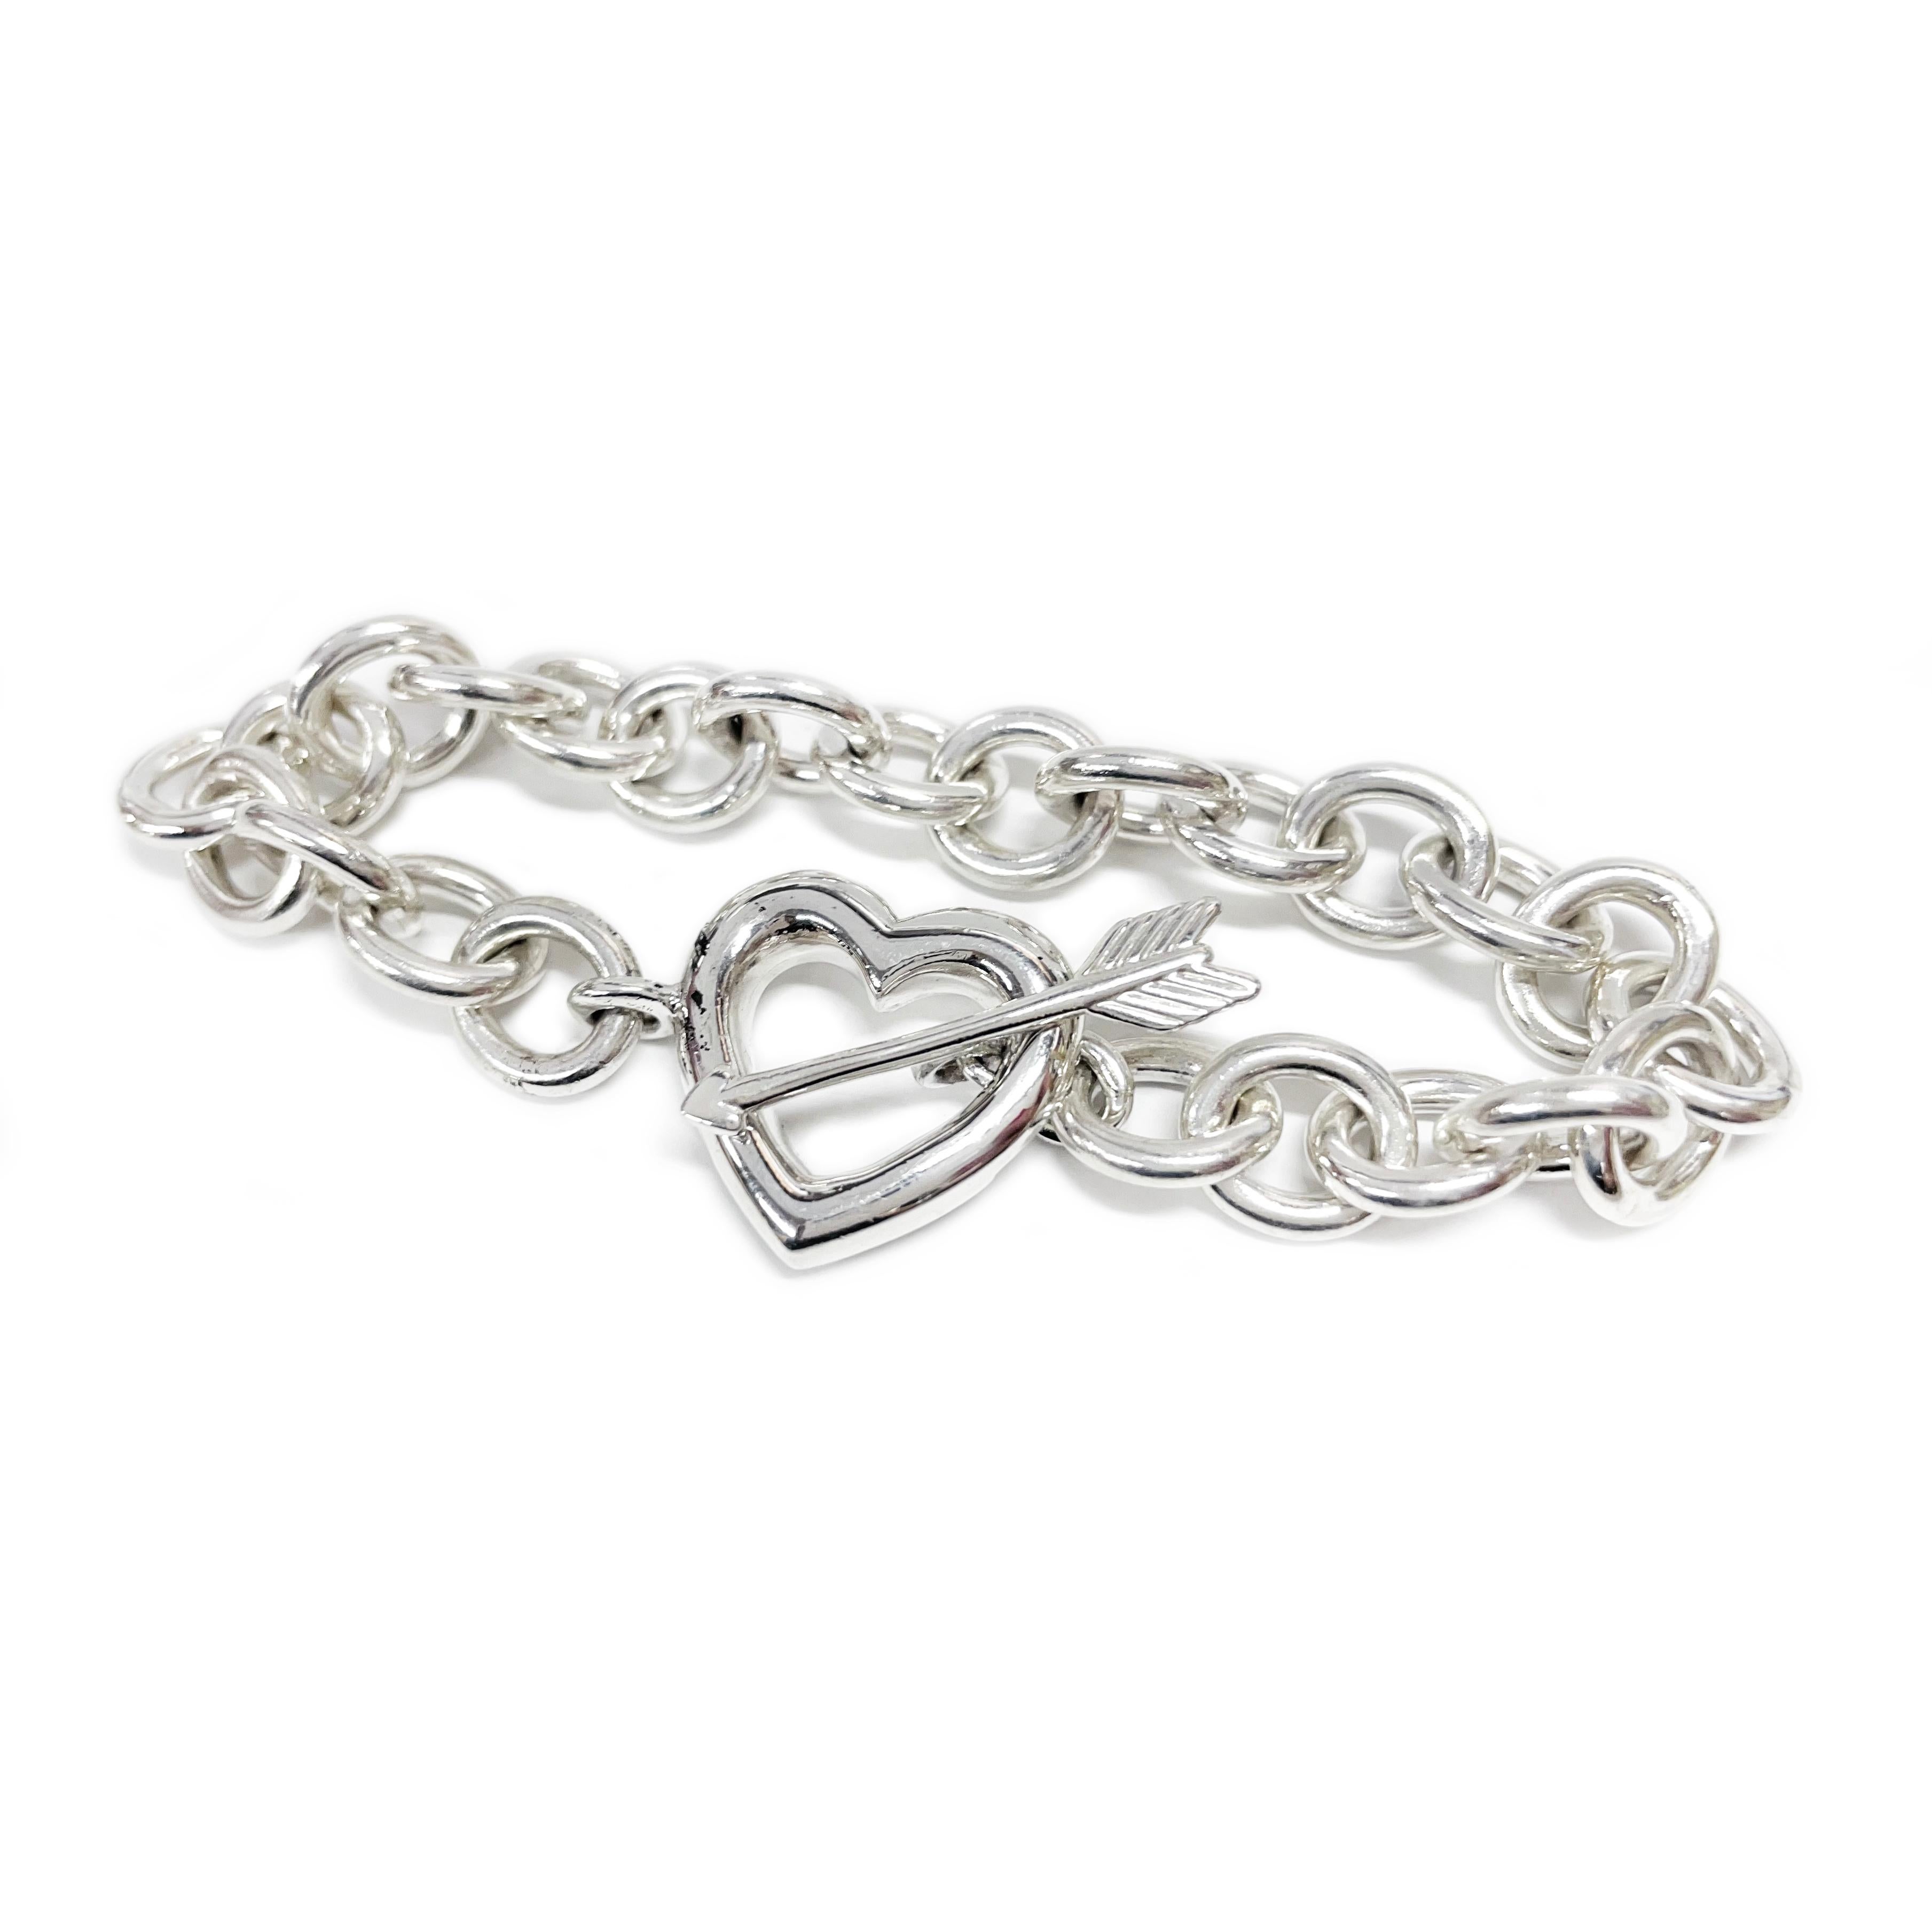 Tiffany & Co. Sterling Silver Heart Arrow Bracelet. The bracelet features a heavyweight link chain with an open heart and arrow toggle clasp. There are slight surface scuffs but no major scratches. The links measure approximately 9mm wide and the